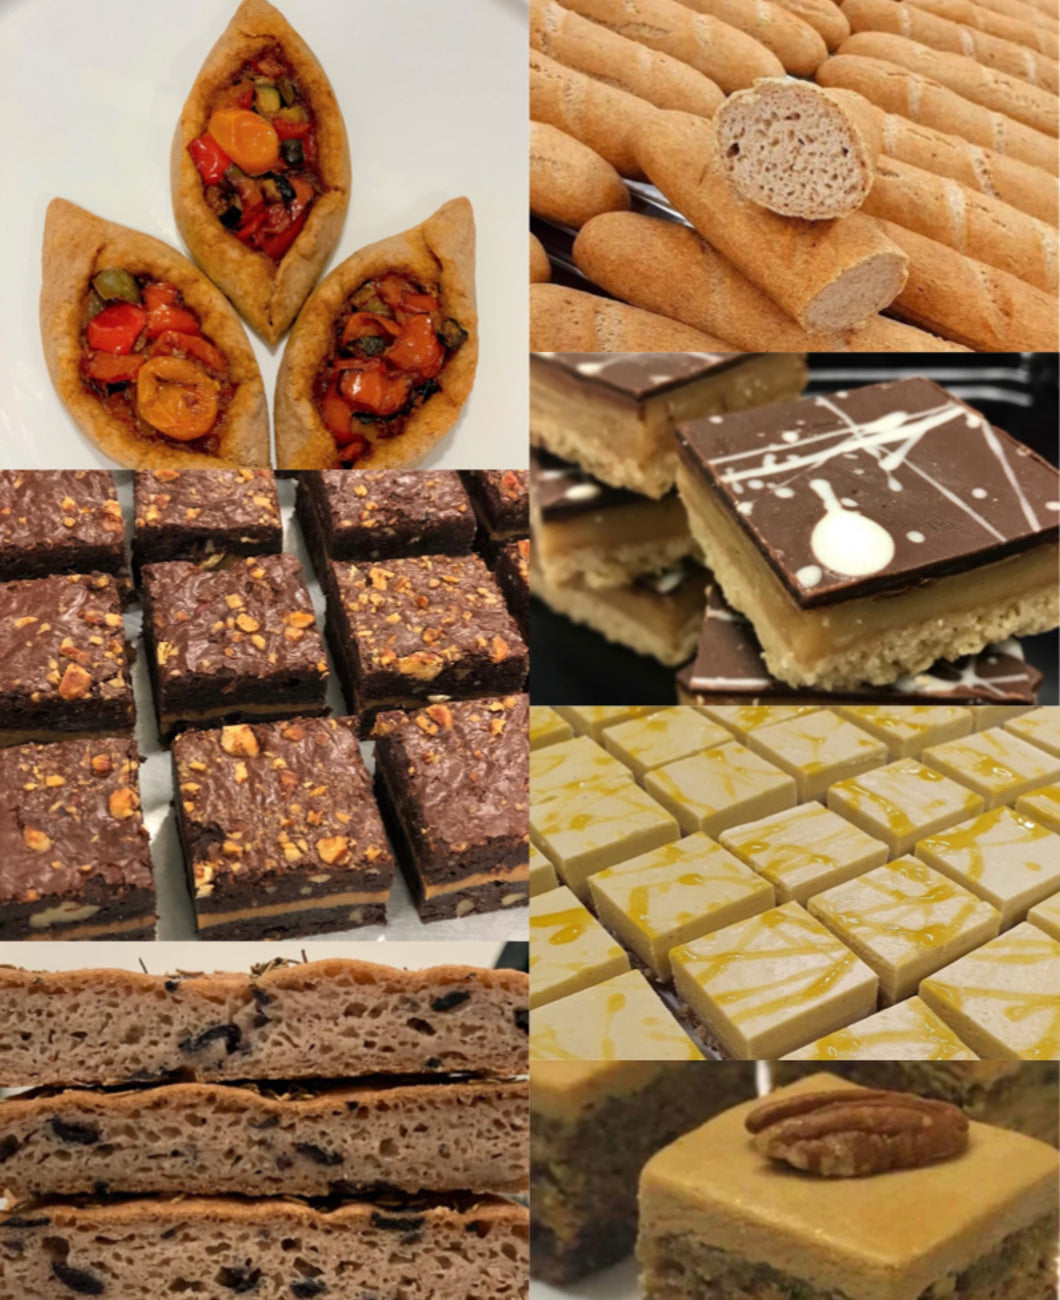 Ultimate Gluten Free Tasting Pack! SAVE $10 Valued at $95 Yours for just $85! - Kiss Kiss Artisan Foods